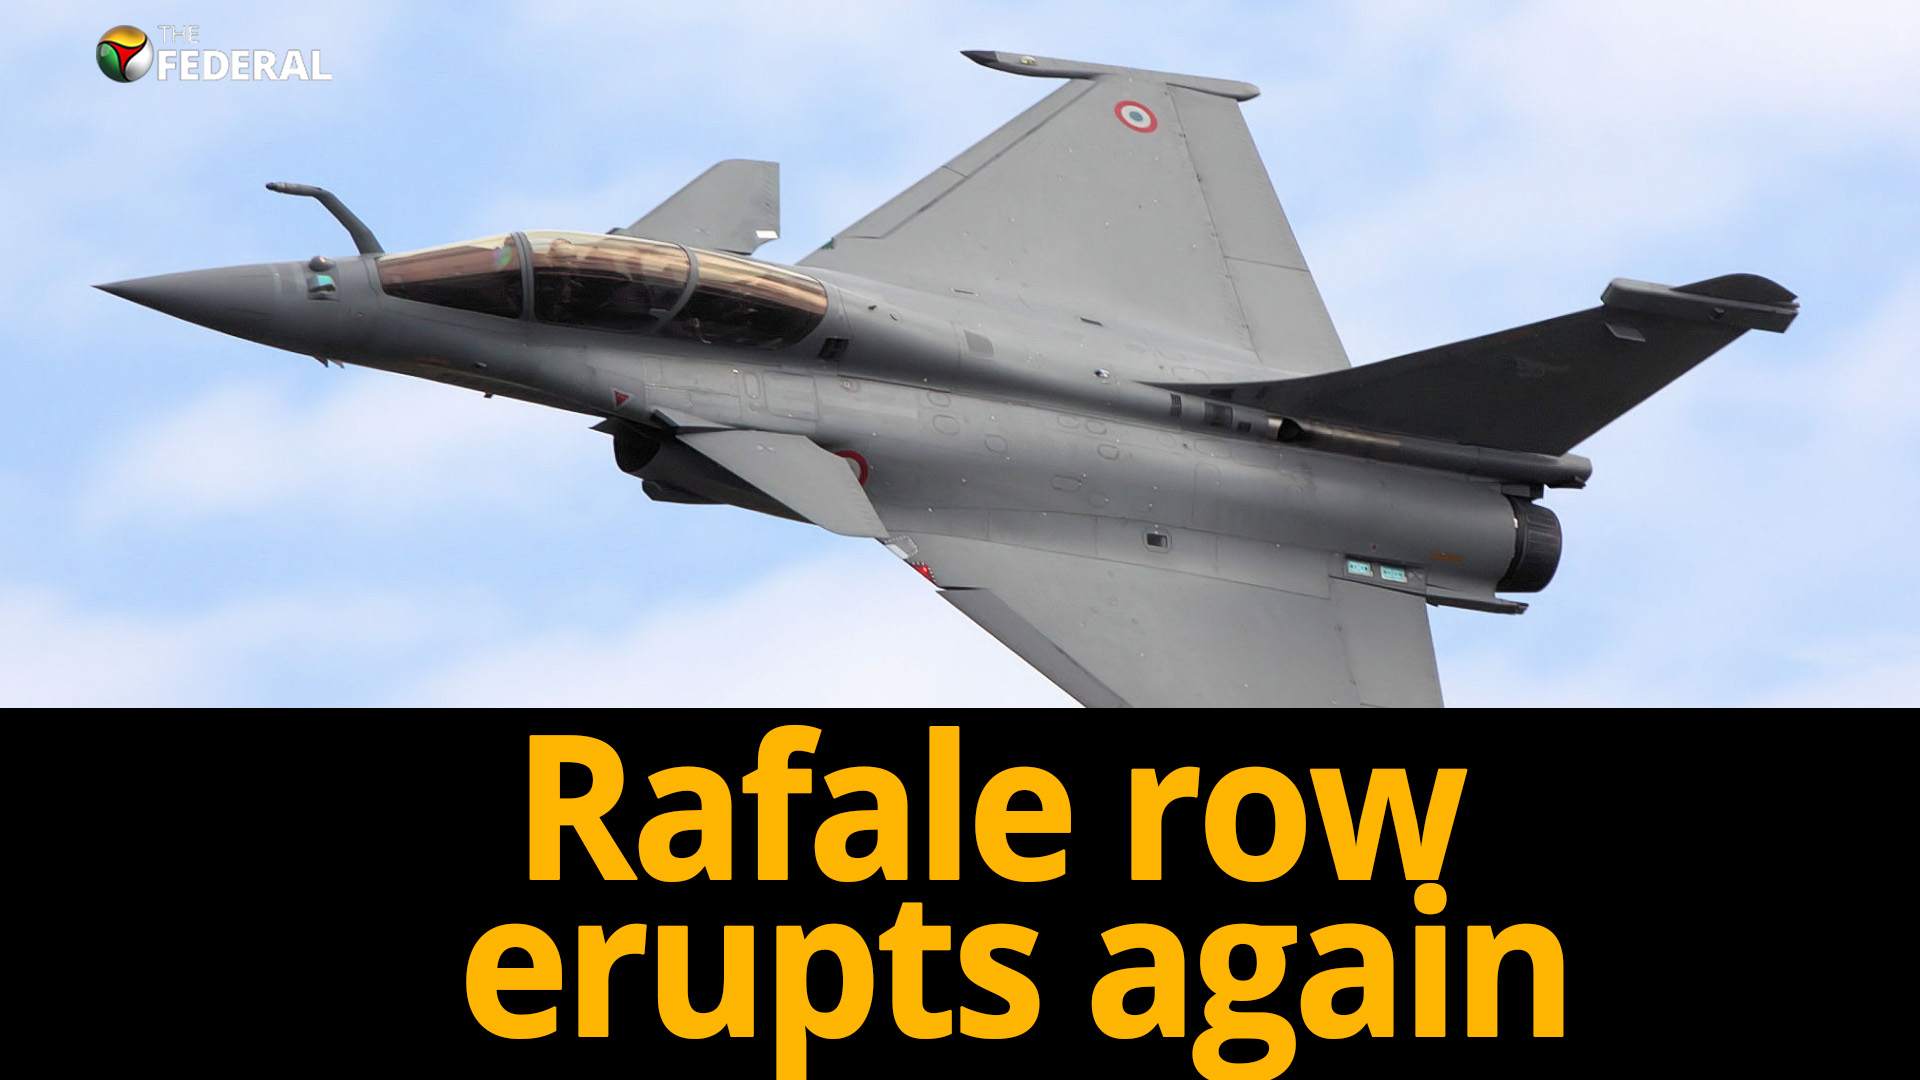 Explained: Frances Rafale deal probe. All you need to know